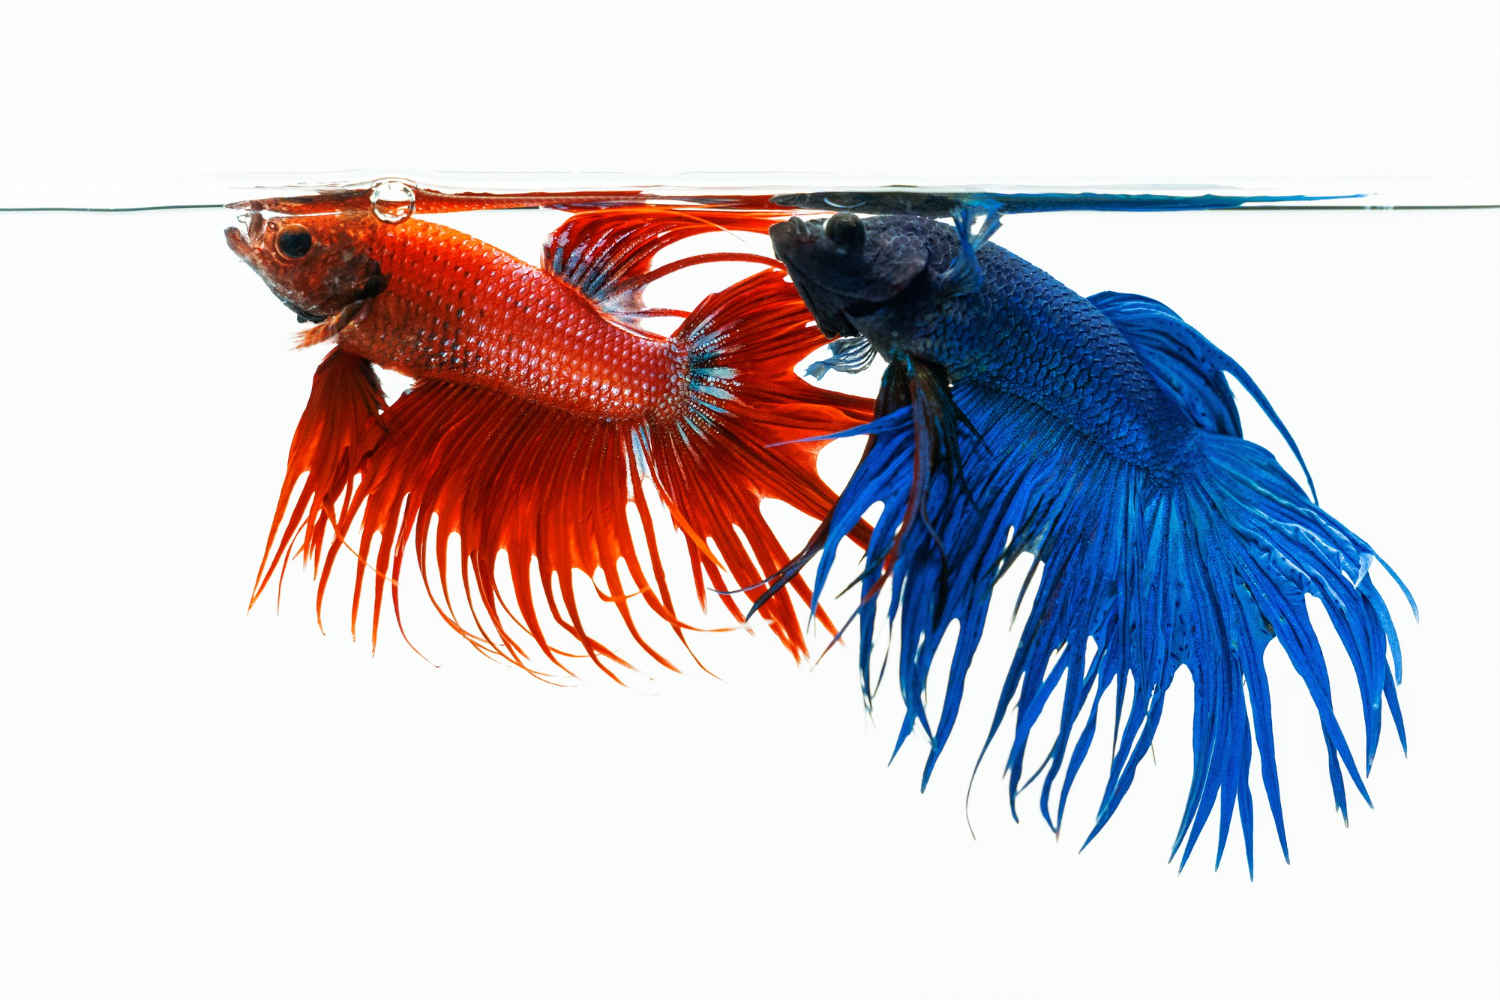 What are the benefits of having a fish as a pet?